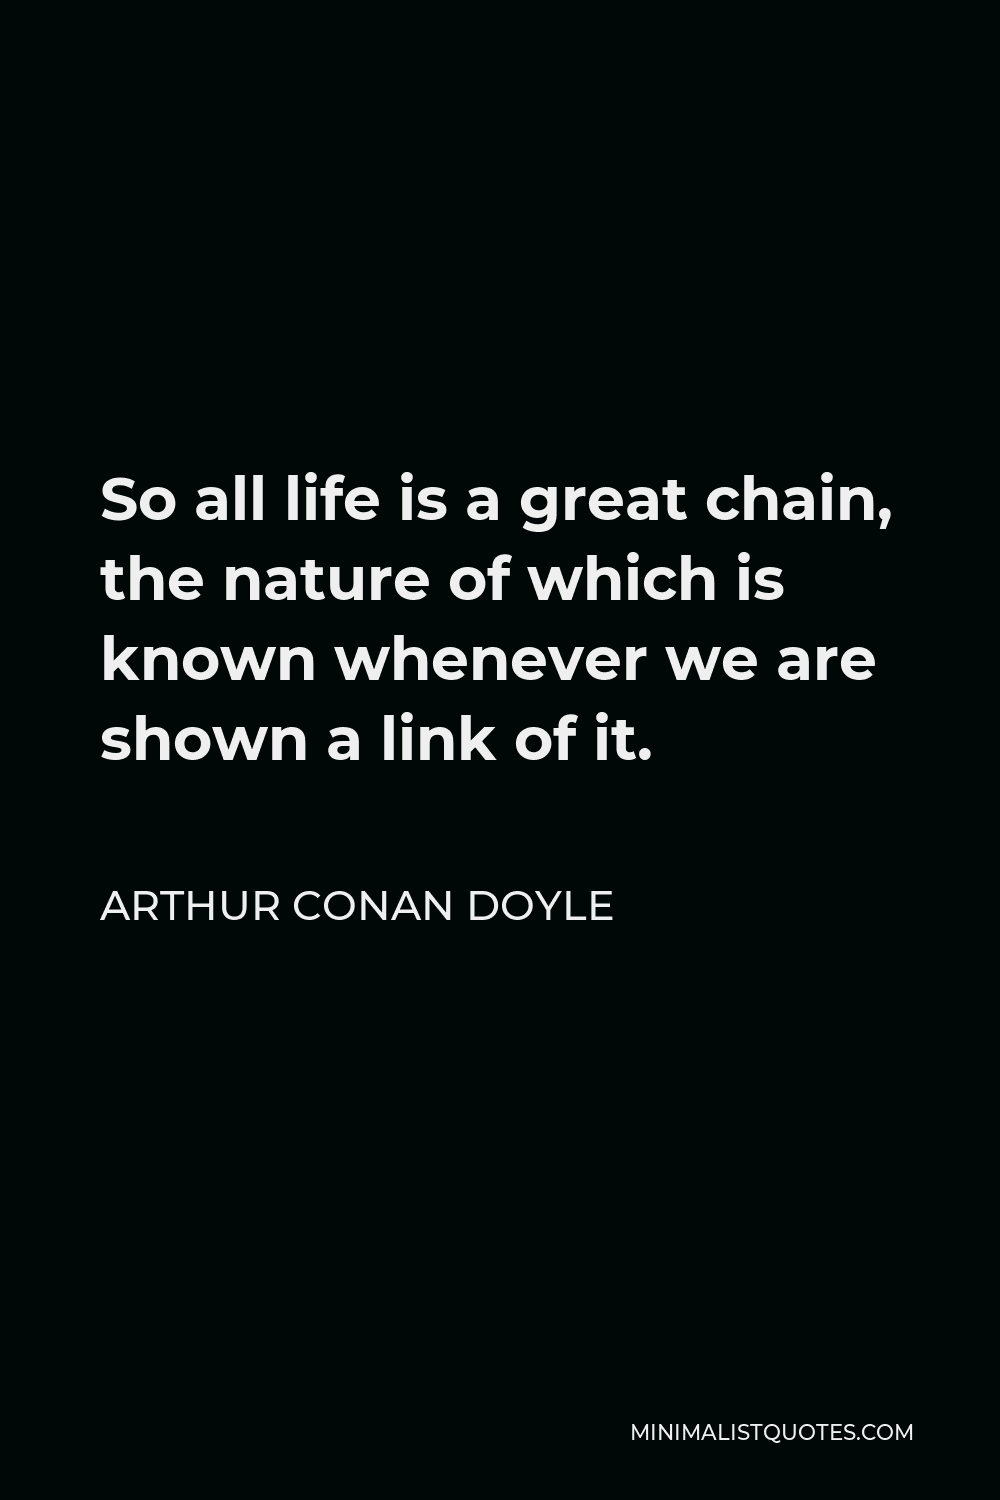 Arthur Conan Doyle Quote - So all life is a great chain, the nature of which is known whenever we are shown a link of it.